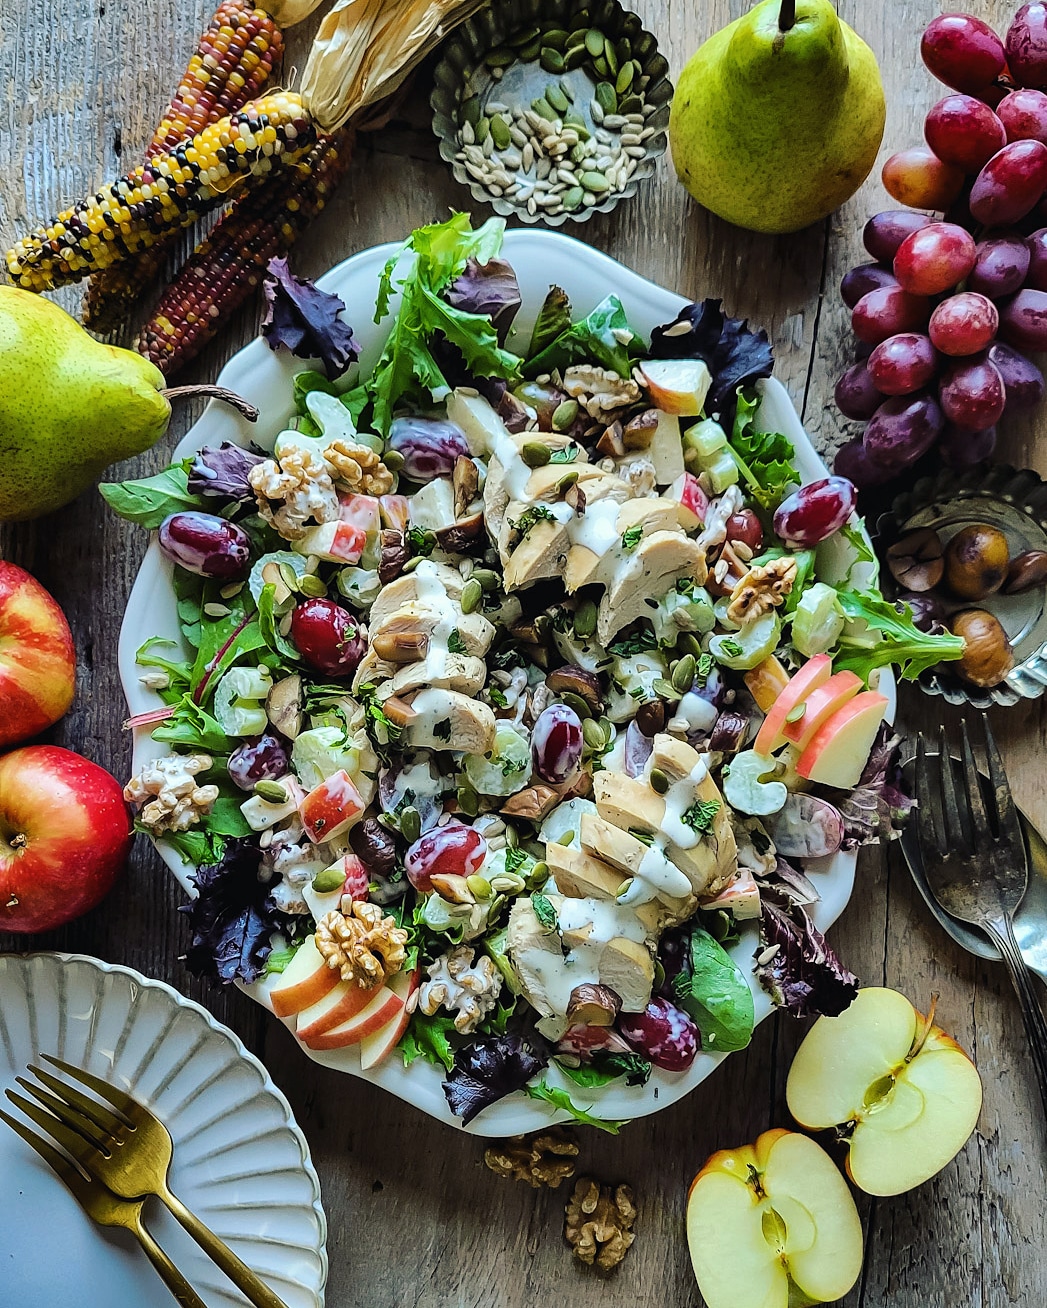 A platter filled with a crunchy colorful Waldorf Salad, with apples, grapes, celery, chicken and chestnuts. The platter is surrounded by rainbow corn, apples, pumpkin and sunflower seeds and grapes.